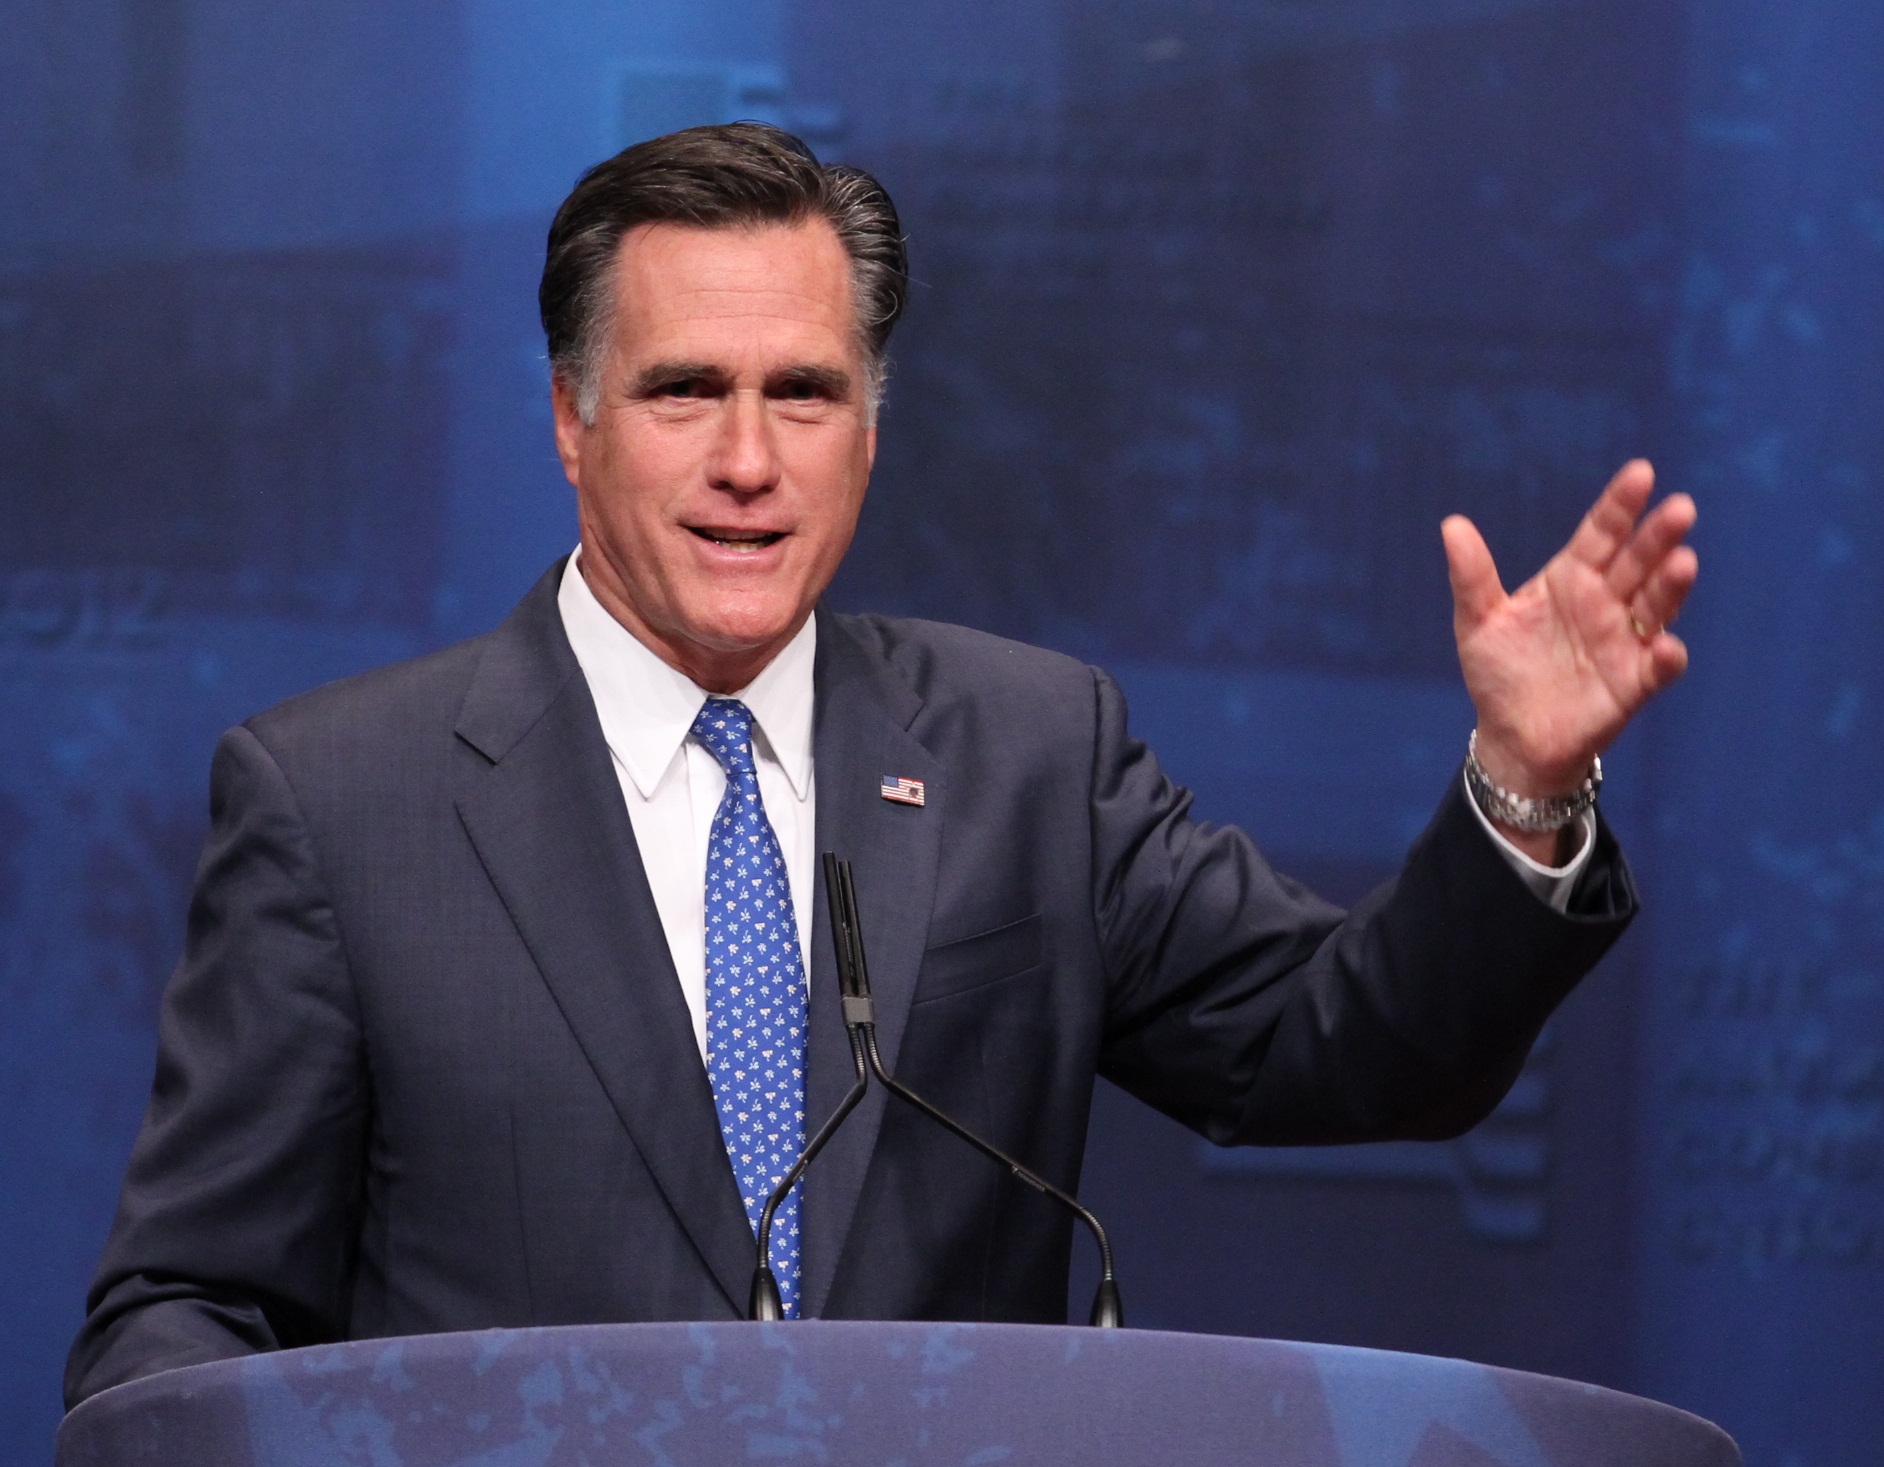 US response to Chinese aggression has been ad hoc short term or piecemeal: Mitt Romney